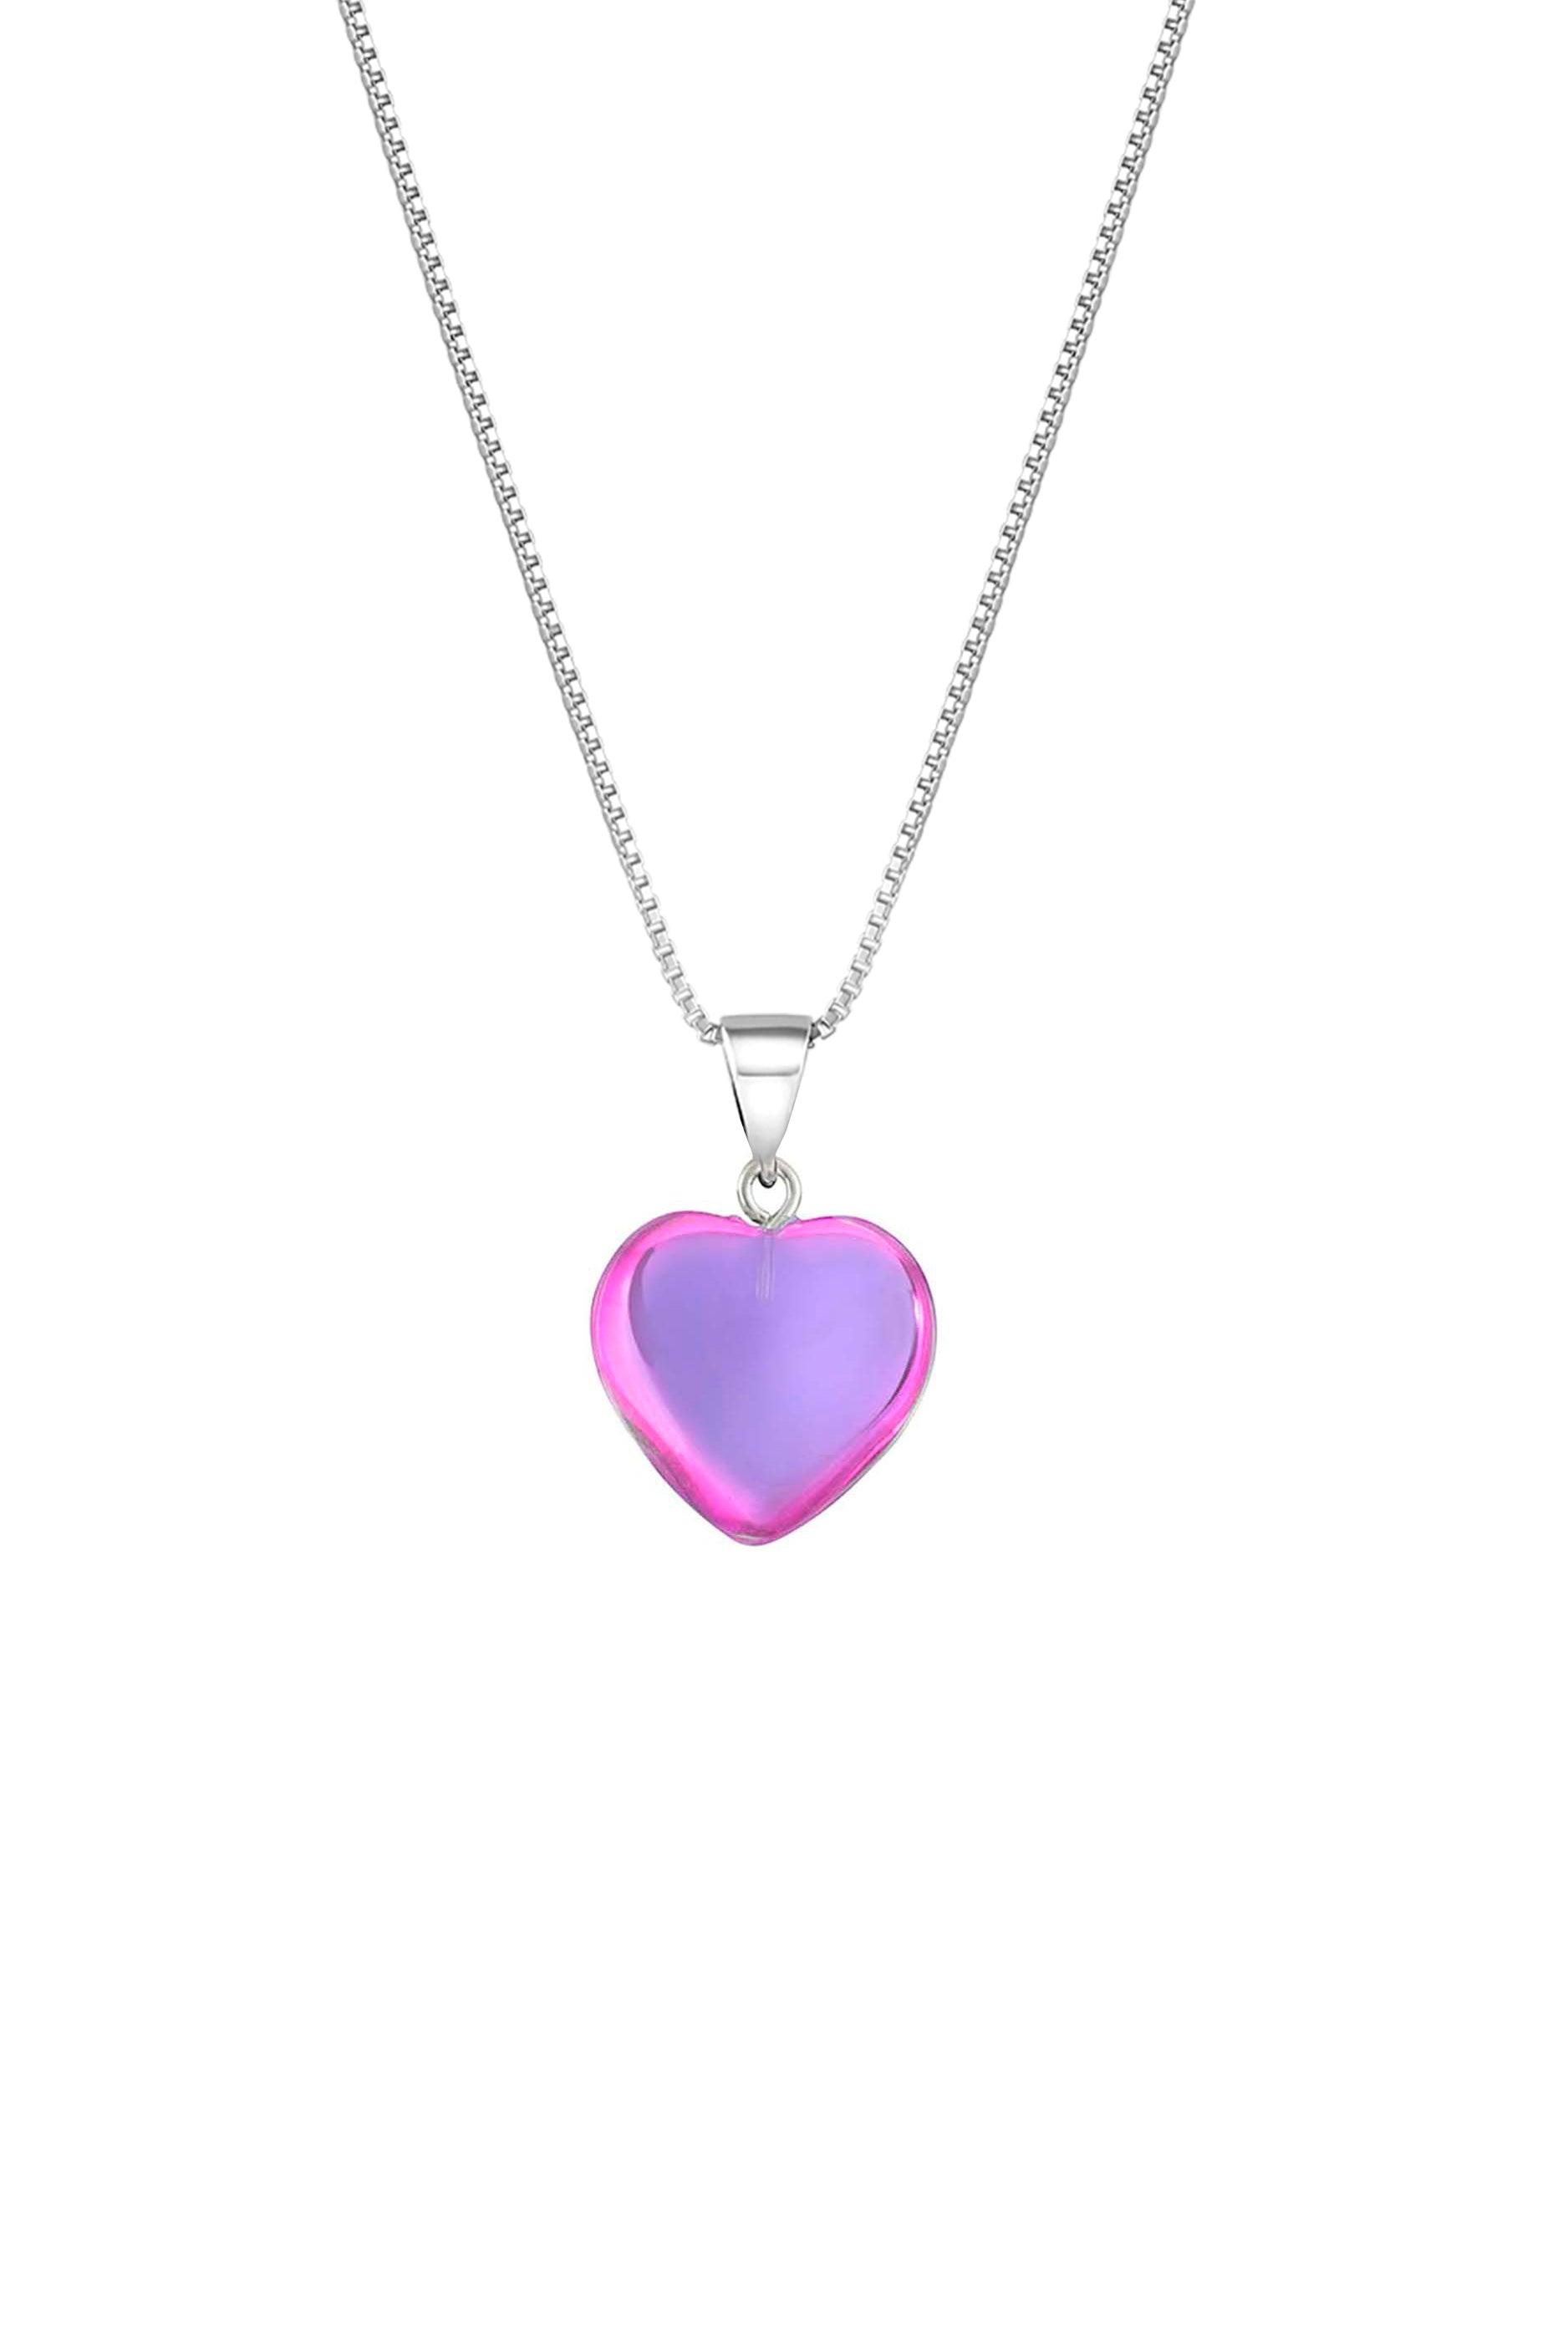 Small Crystal Heart Pendant by LeightWorks, San Diego